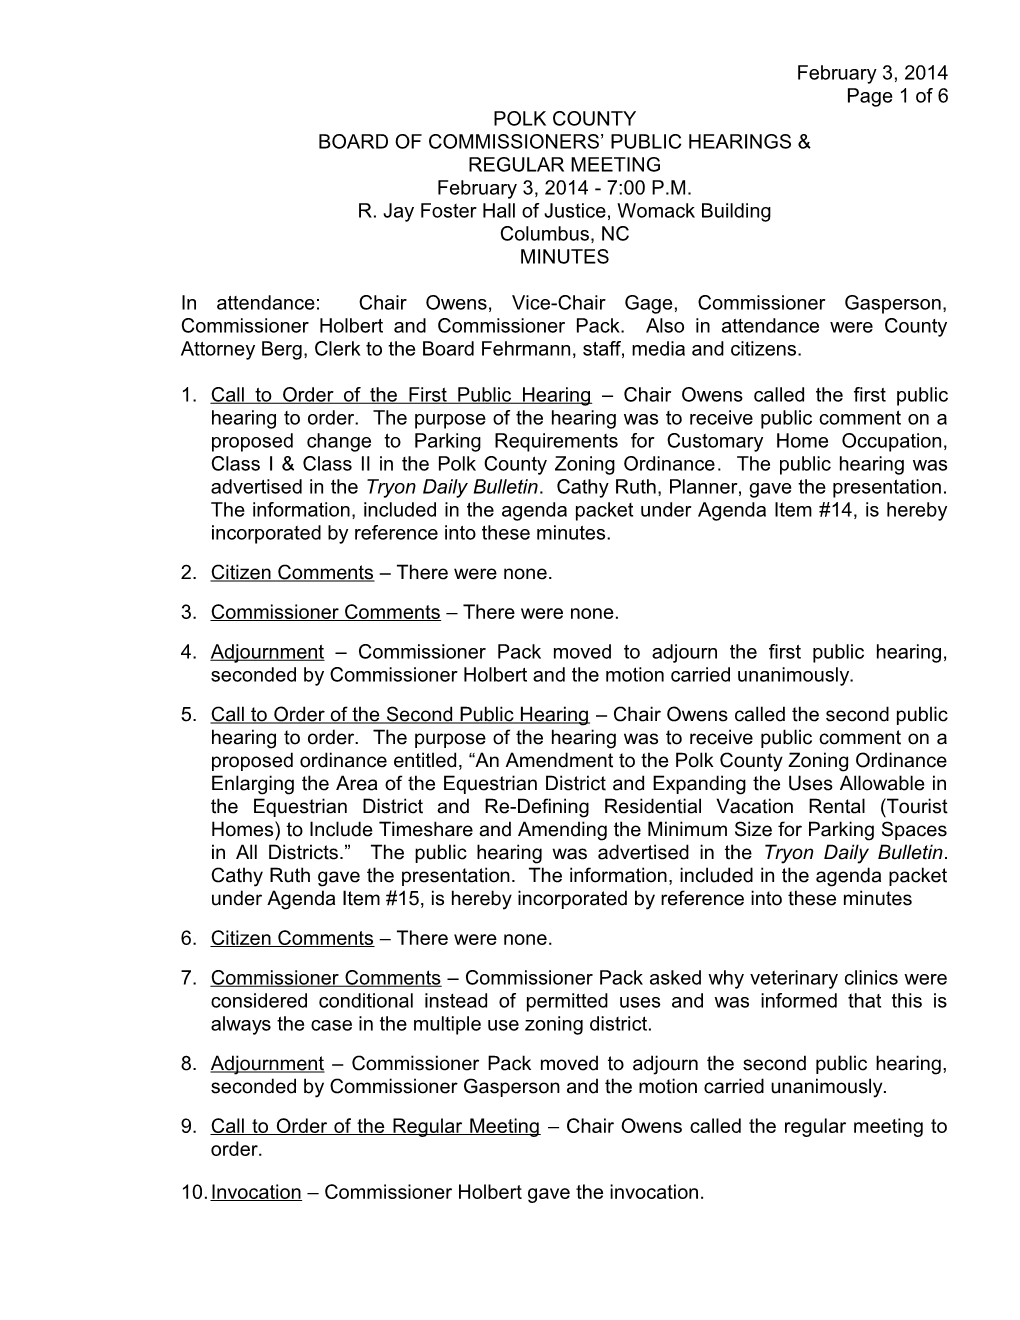 Board of Commissioners Public Hearings